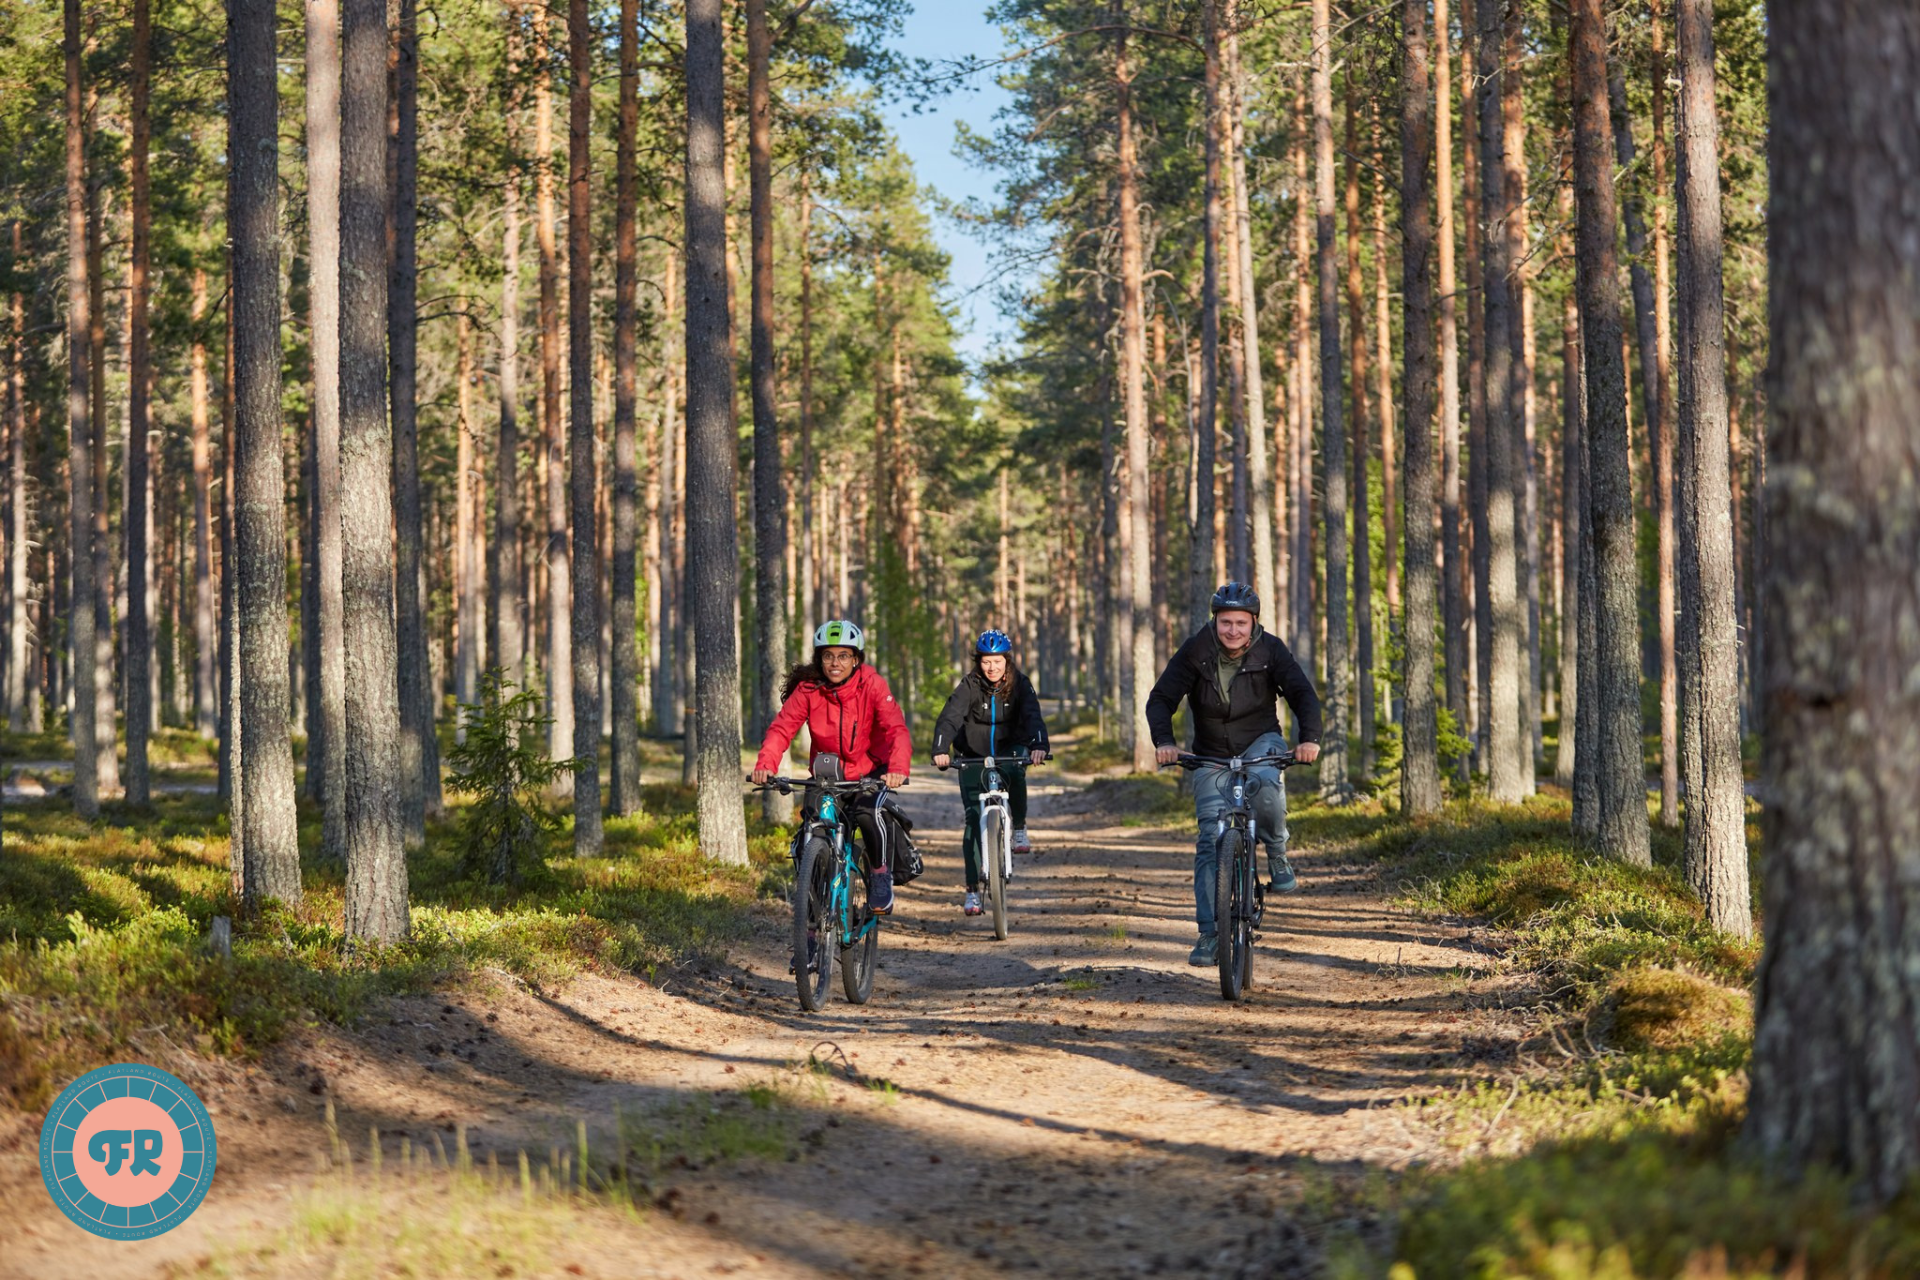 Cyclists riding on a forest trail.